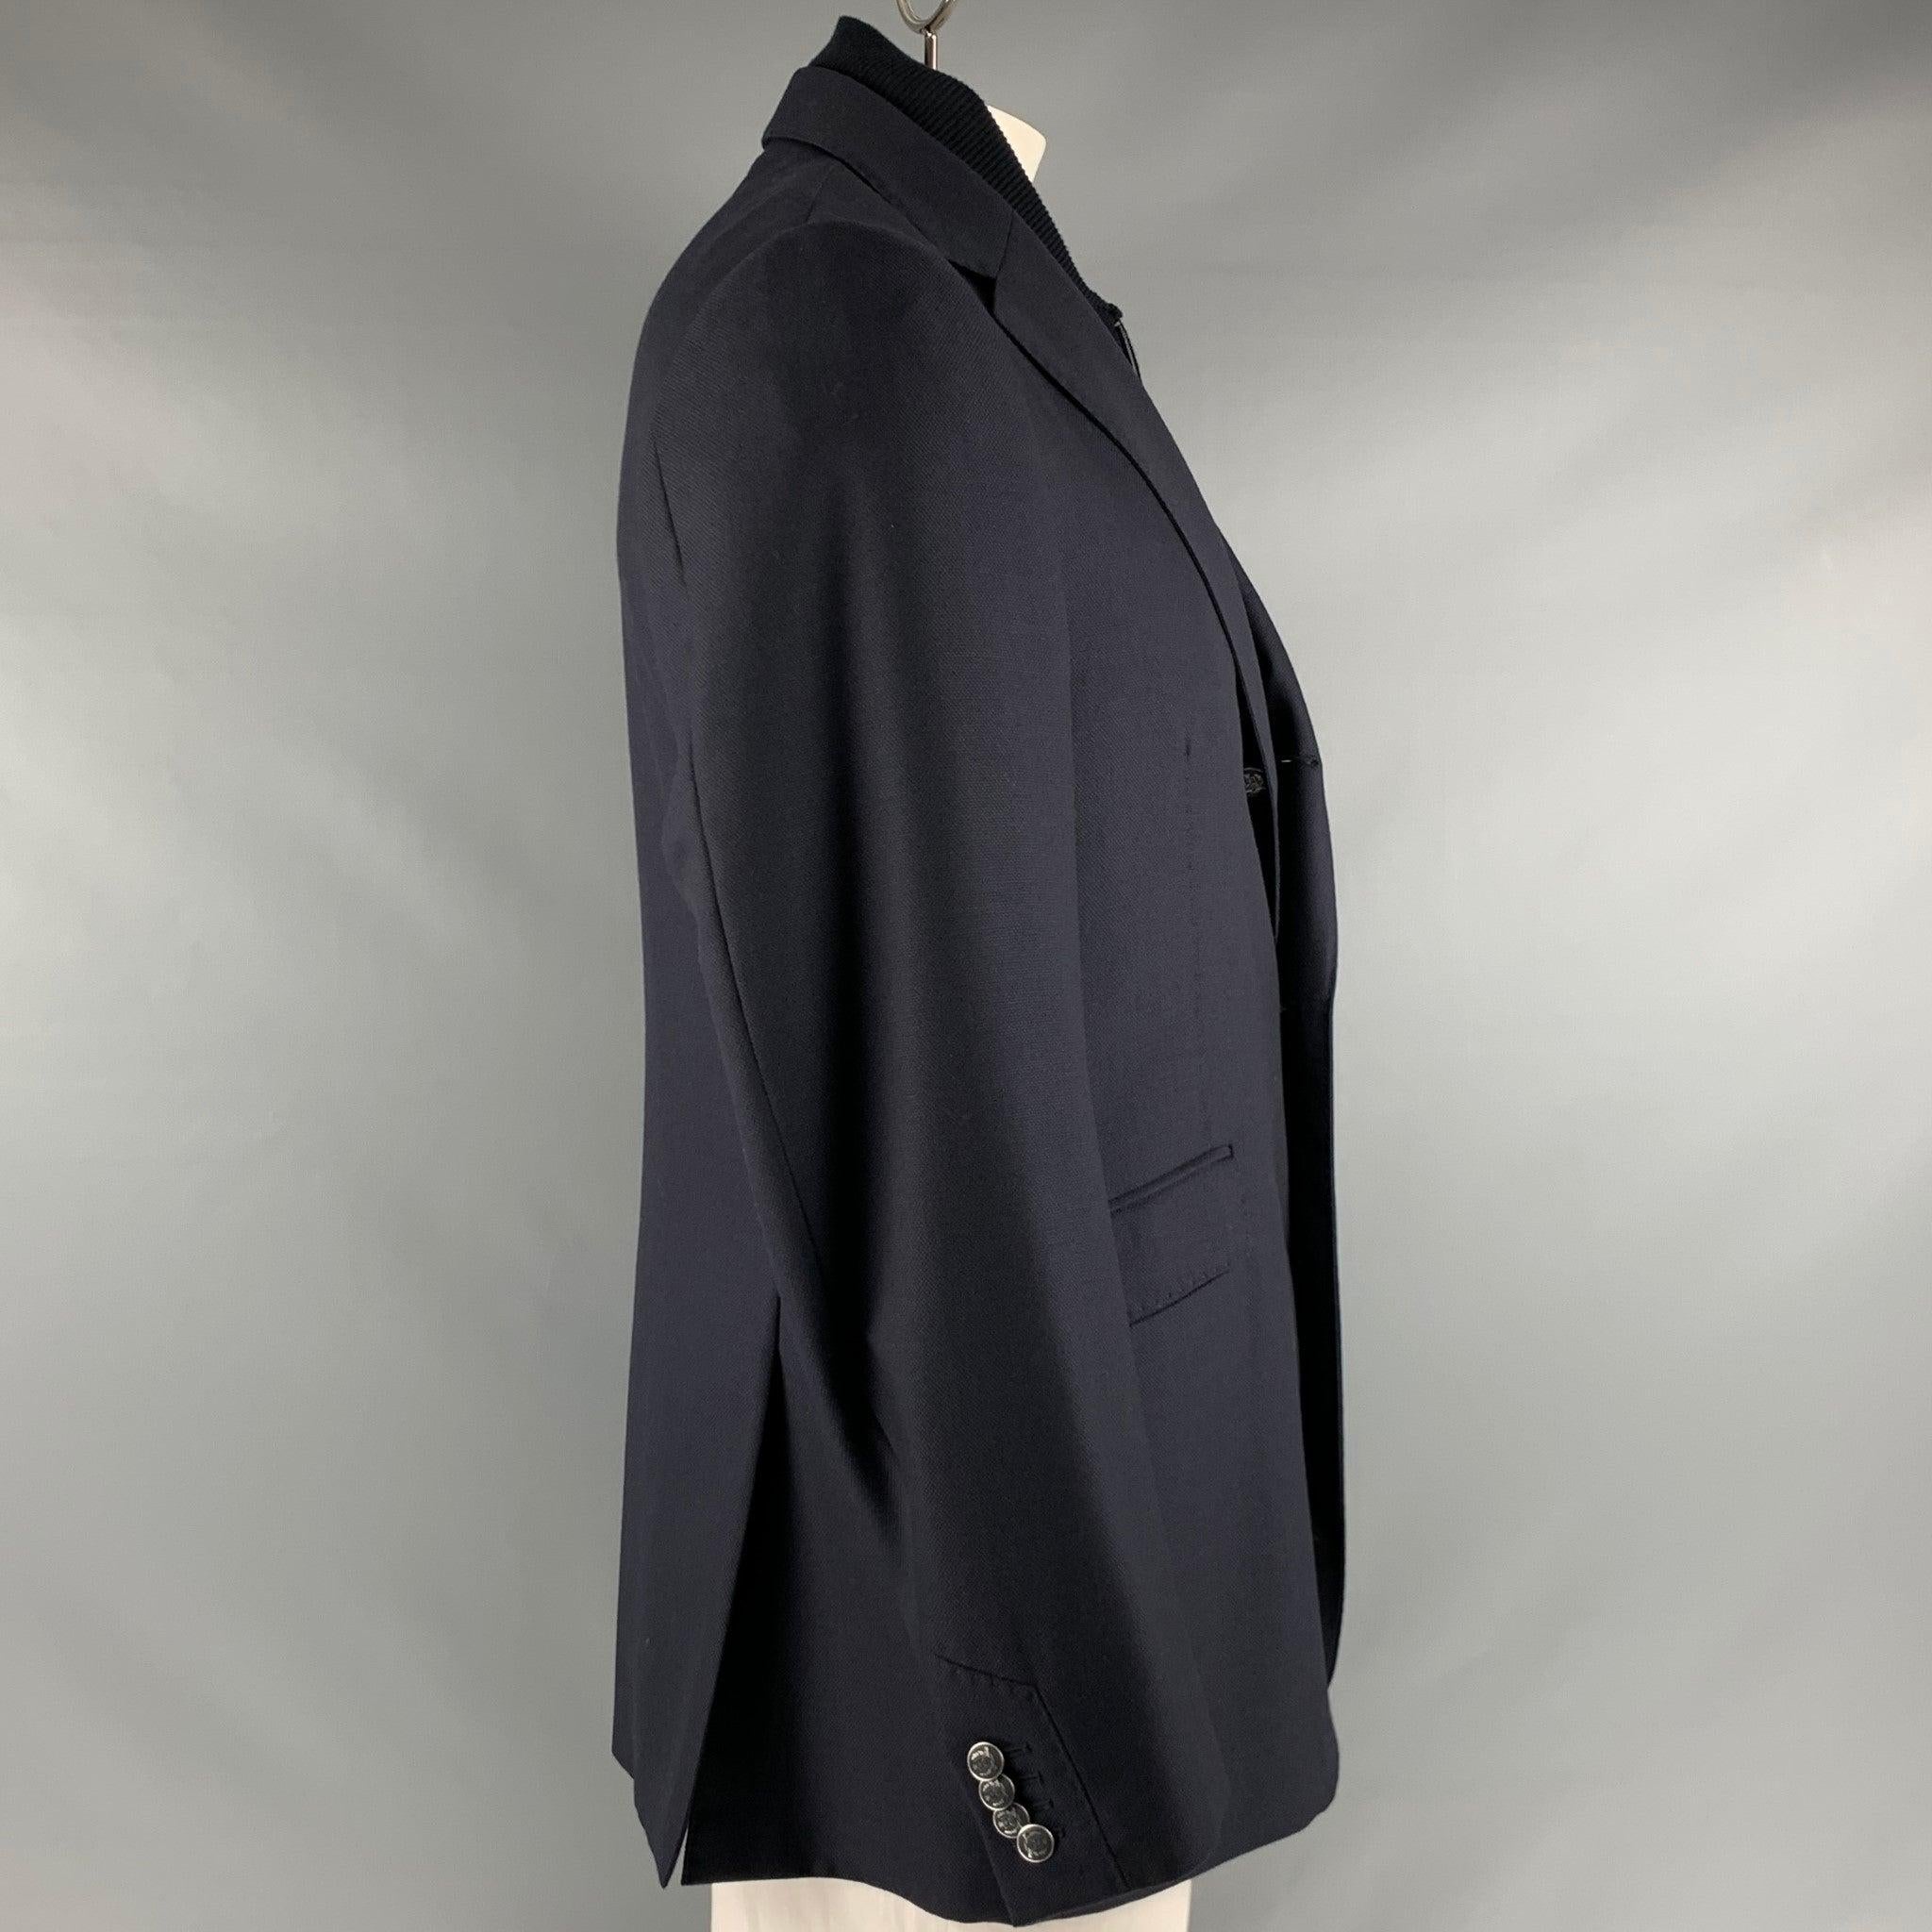 CORNELIANI
jacket in a navy virgin wool fabric featuring a single breasted style, three pockets, removable zip up inner lining, and three button closure. Made in Italy. Very Good Pre-Owned Condition. Minor signs of wear. 

Marked:   52